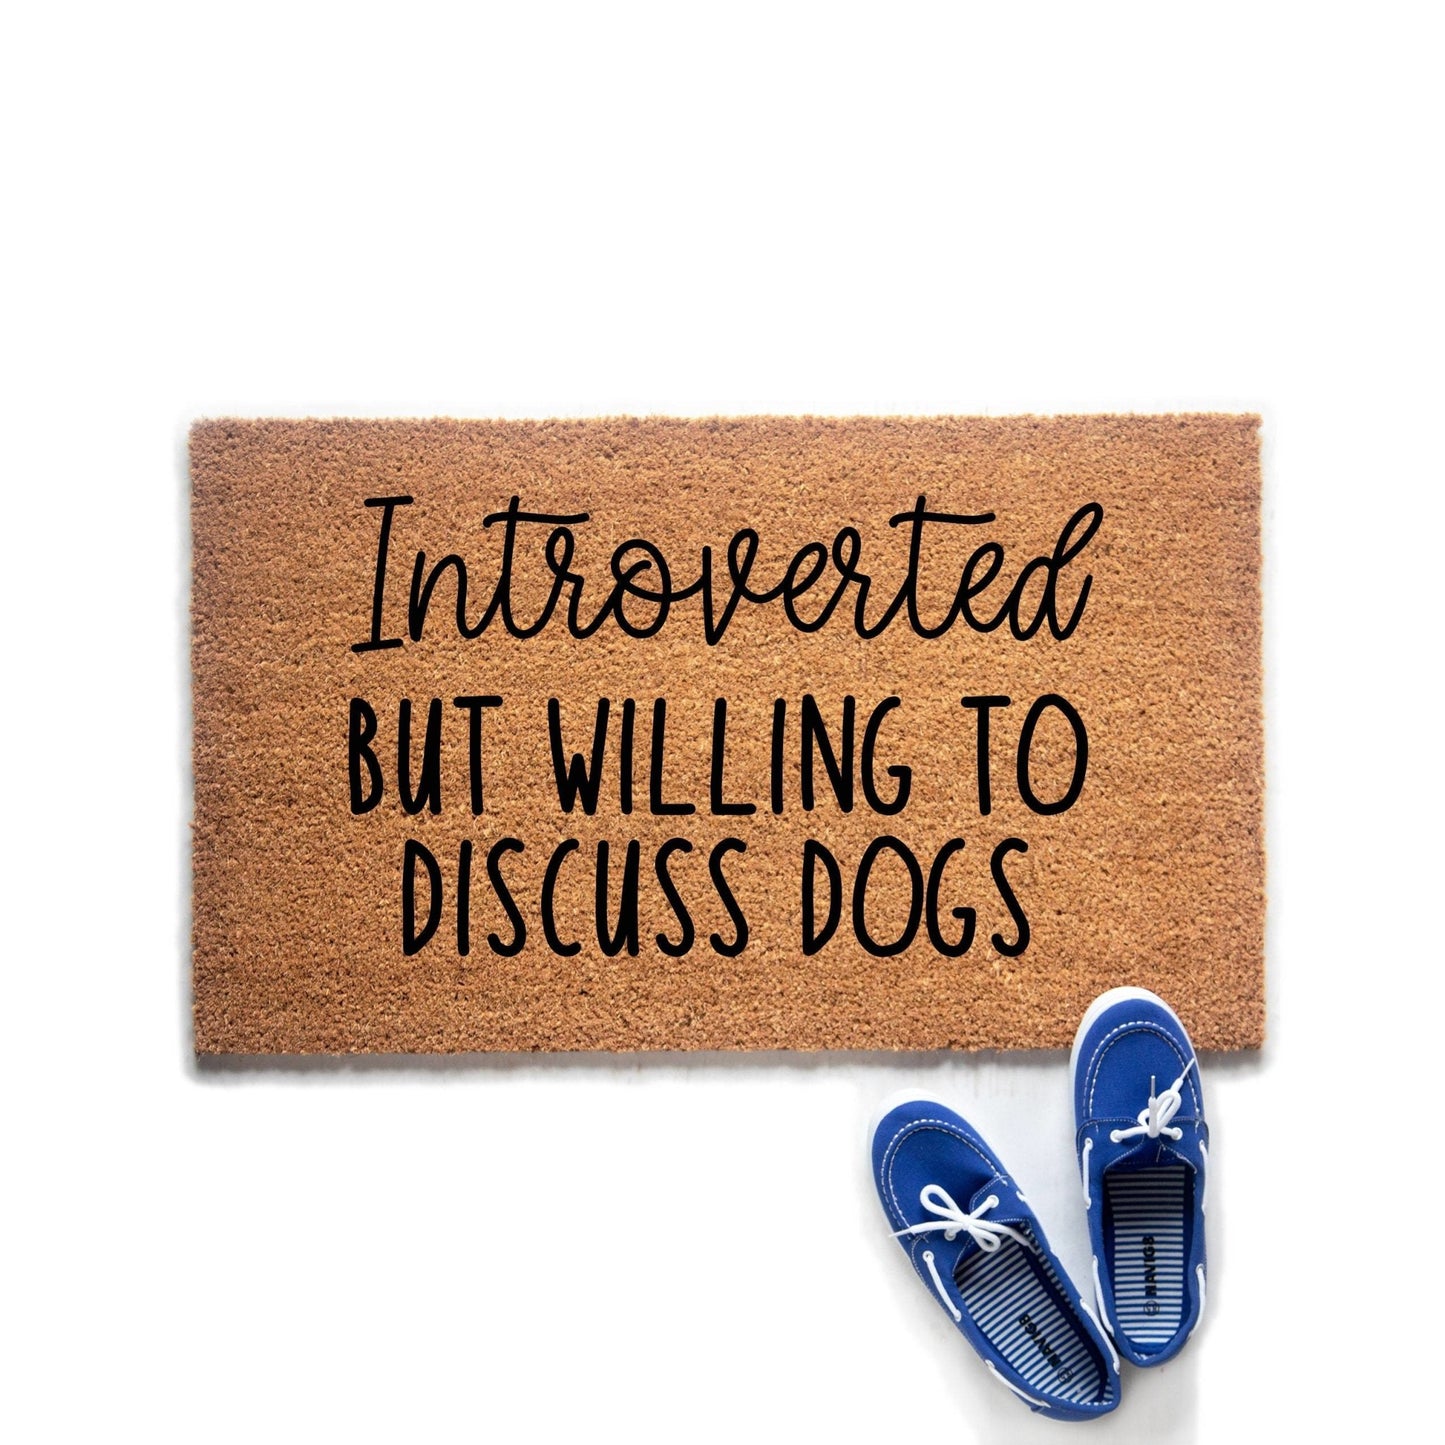 Introverted But Willing to Discuss Dogs Doormat